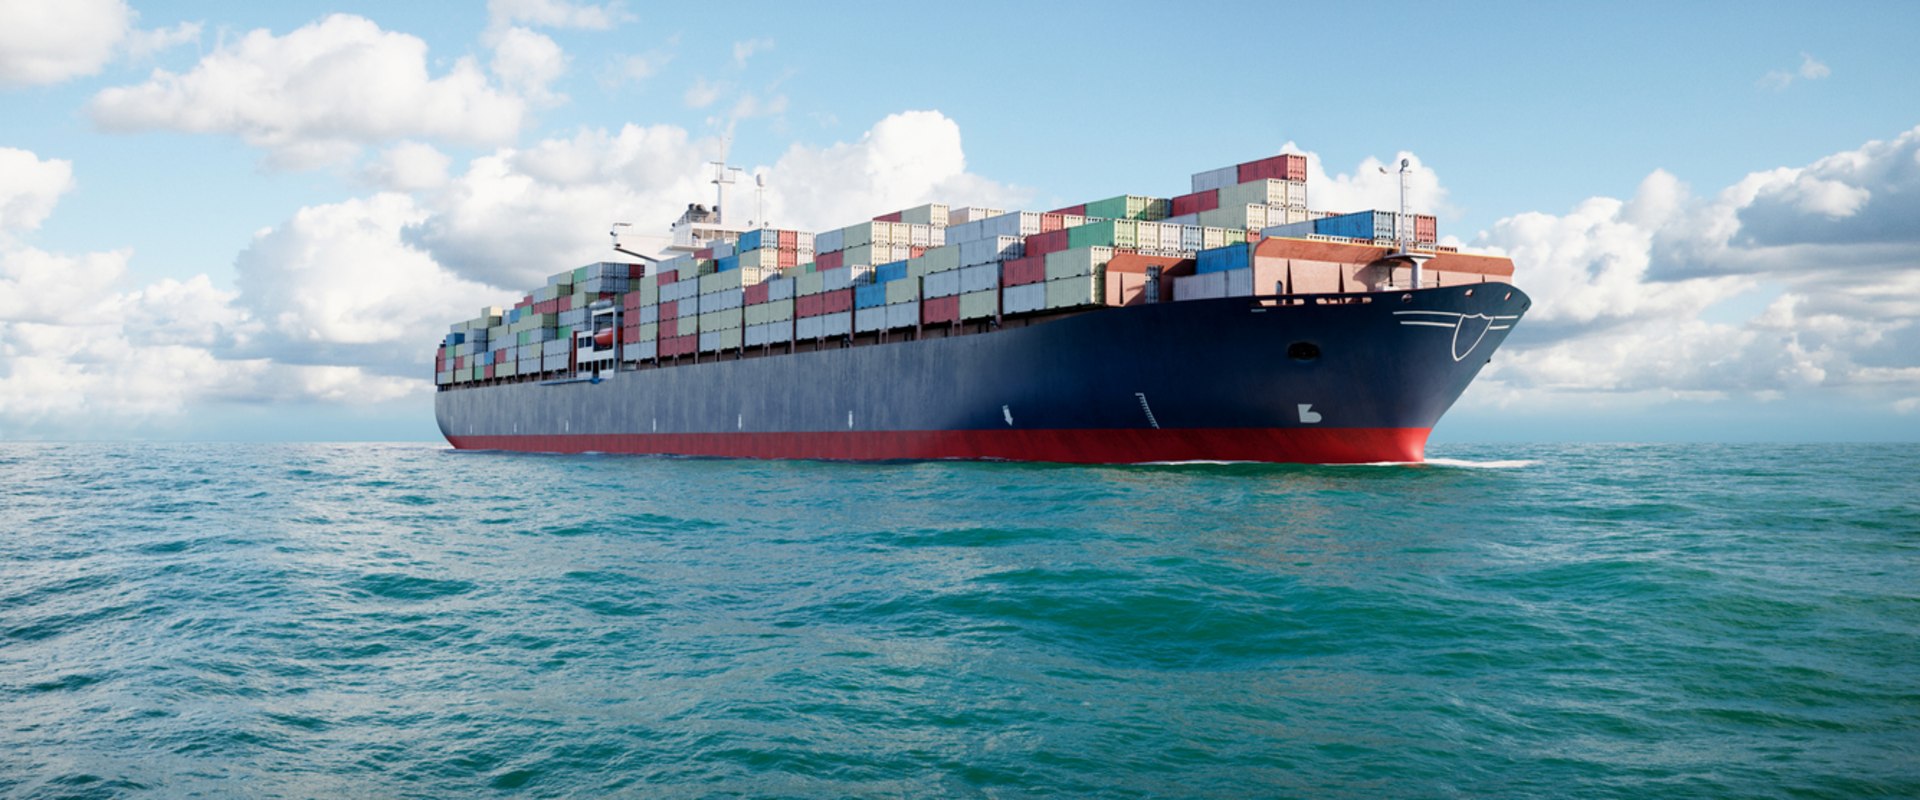 Pollution Liability Coverage - Exploring Marine Insurance Policies